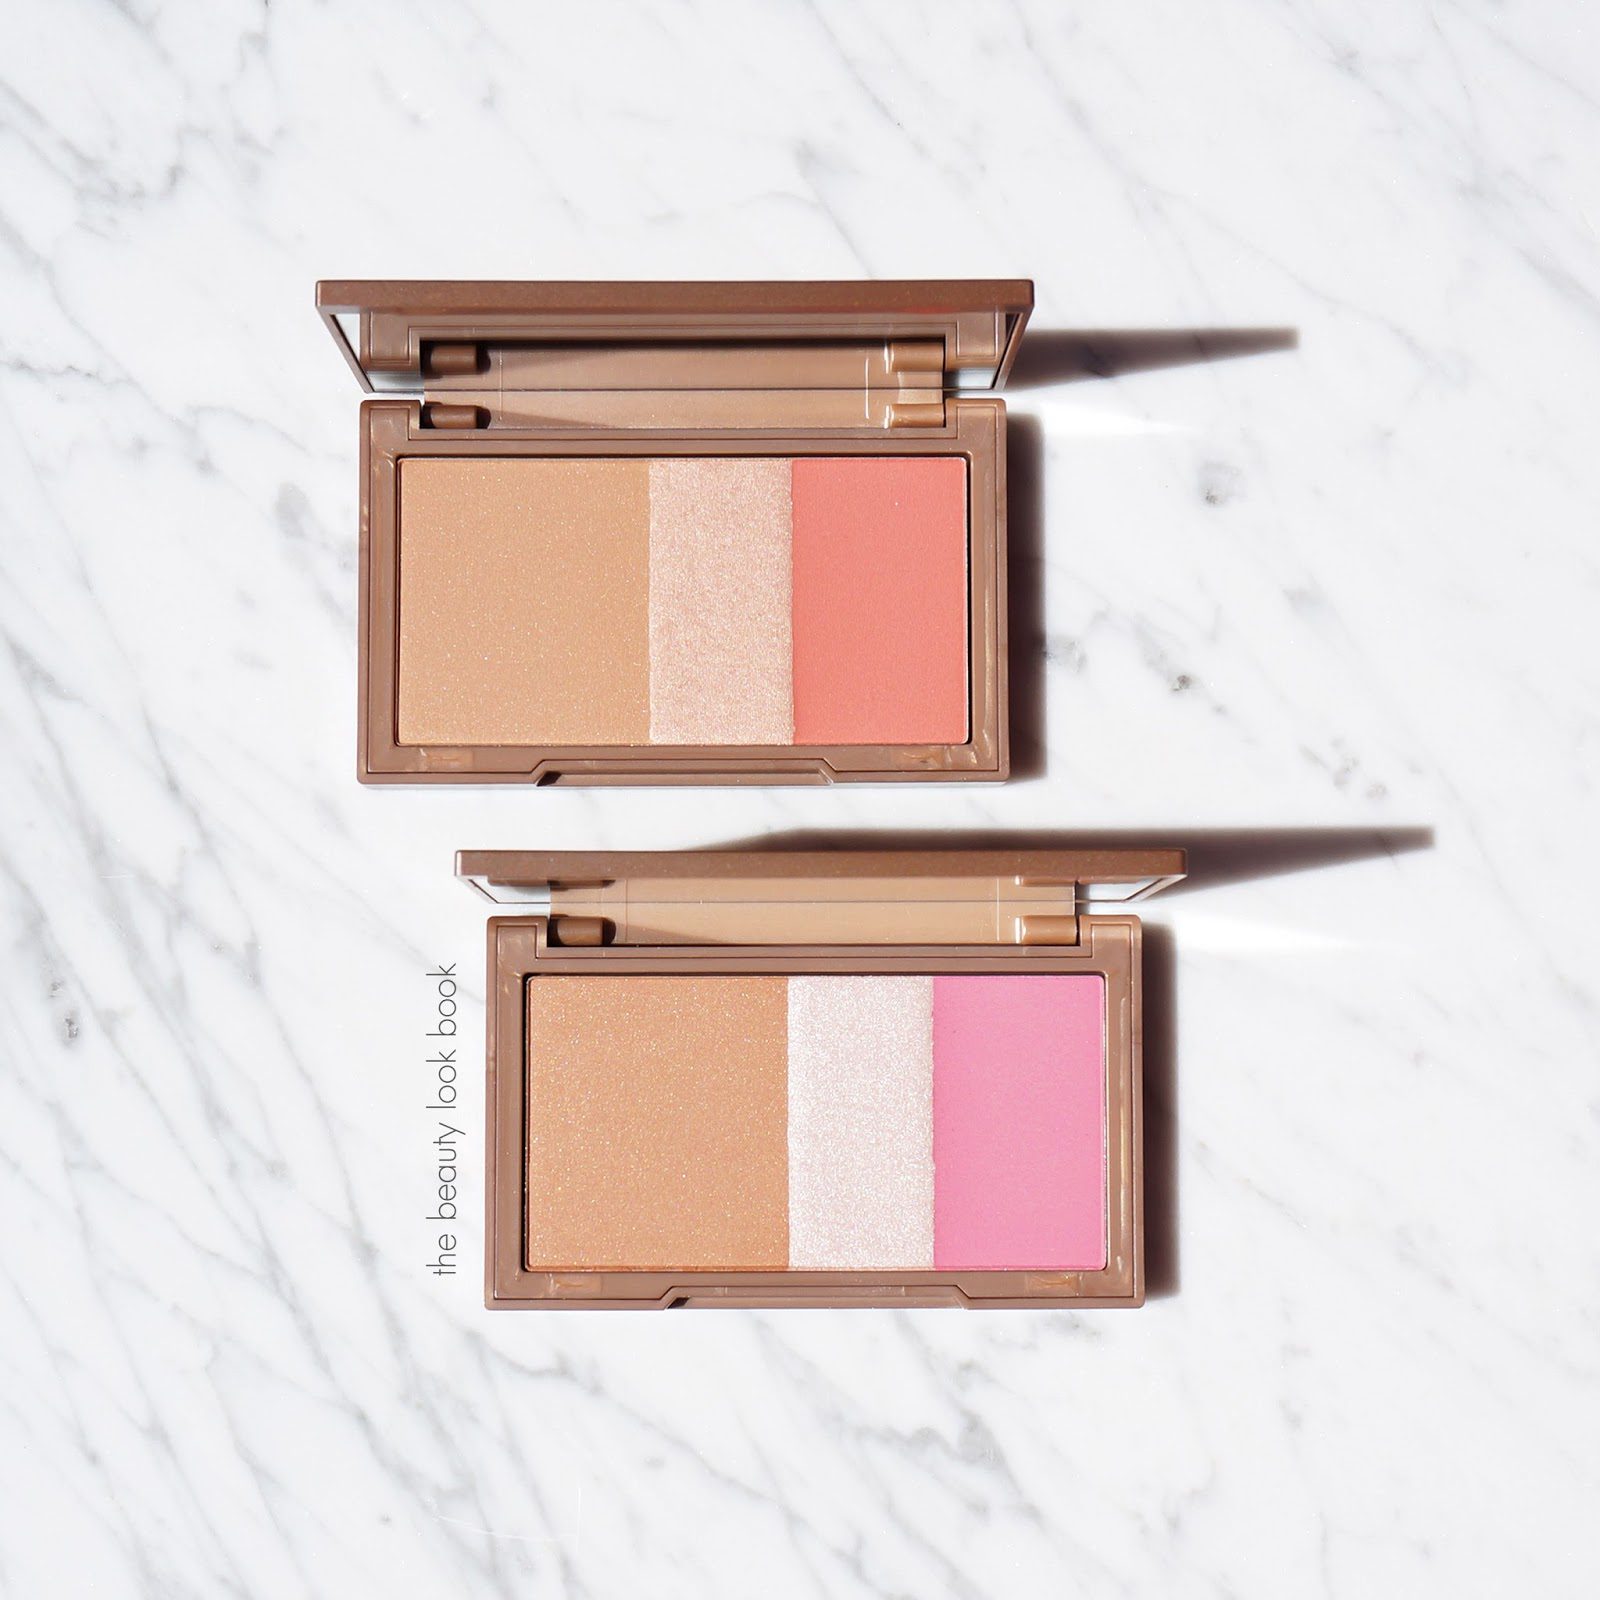 Urban Decay Naked Flushed Palettes - Native and Streak - The ...